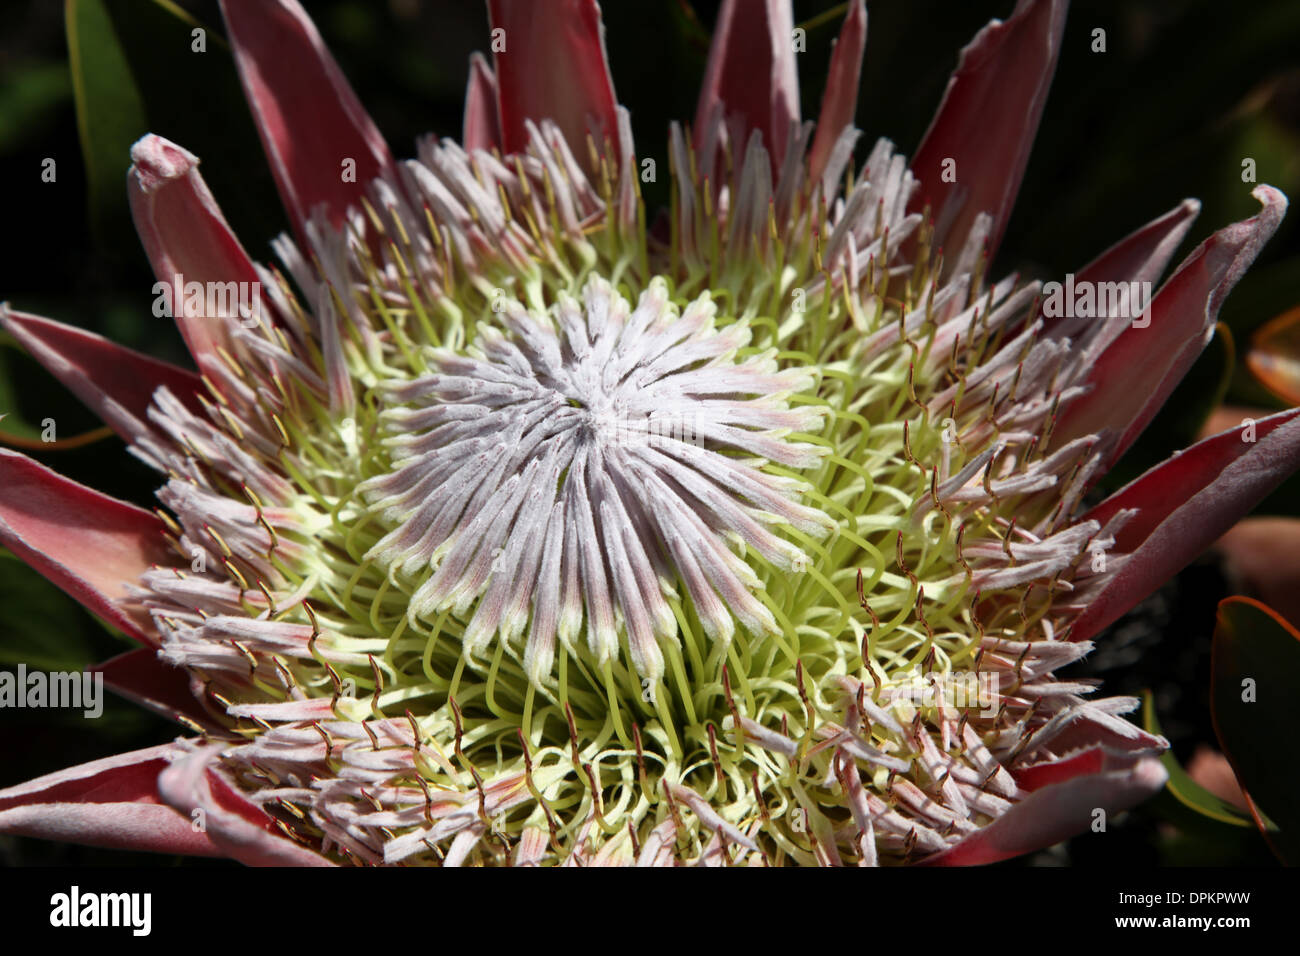 Close up of a proteas flower, not fully opened Stock Photo